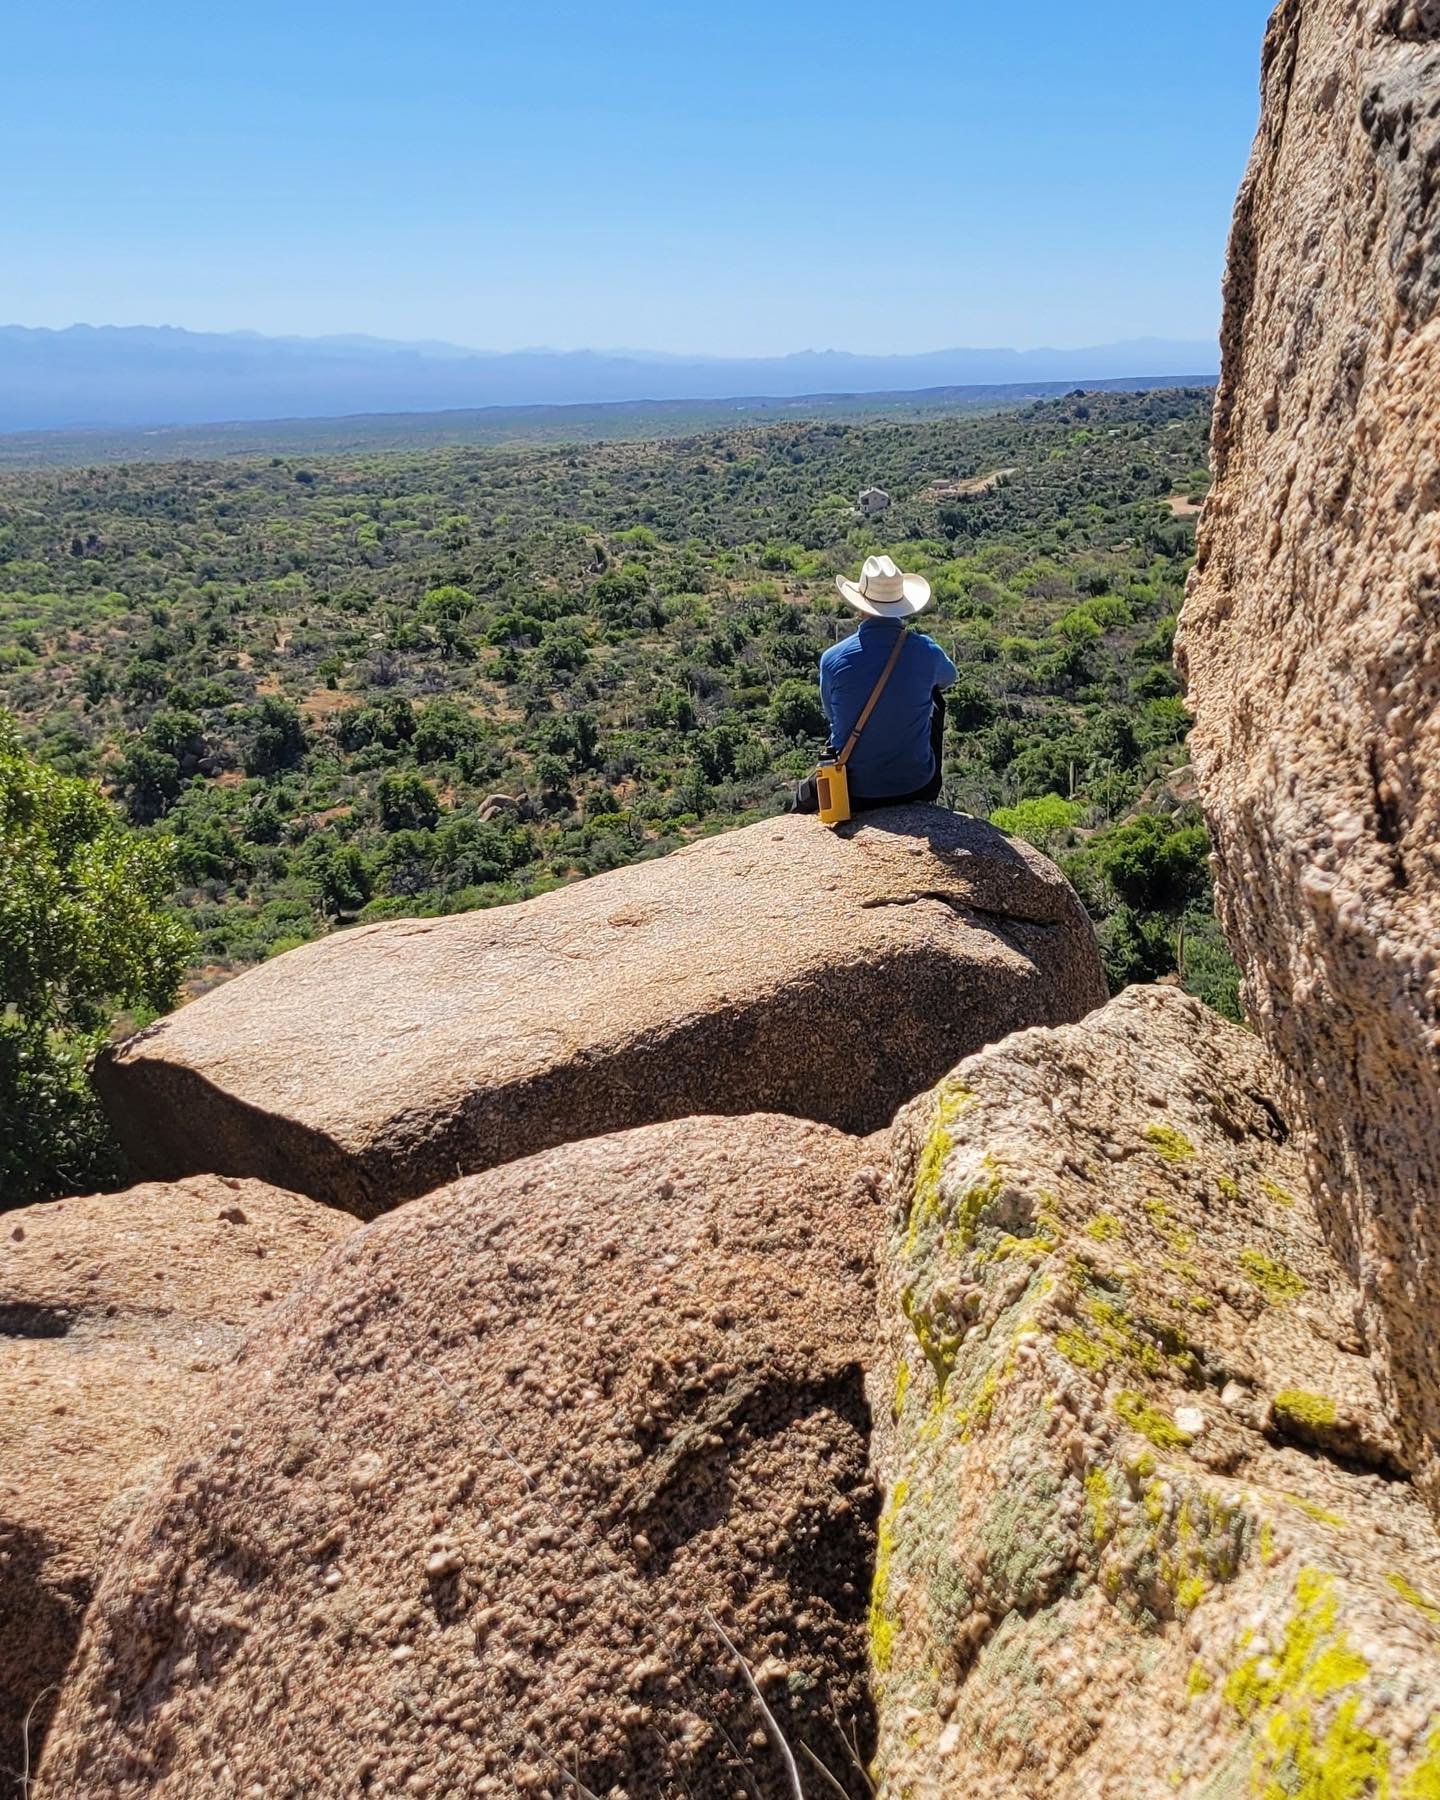 Sitting atop 1.4 billion year old Oracle Granite at the summit of the Granite Overlook Trail. Looking southeast across Oracle State Park, the San Pedro Valley and the distant Galiuro Mountains.&rdquo;. Photo by Tom Buckley